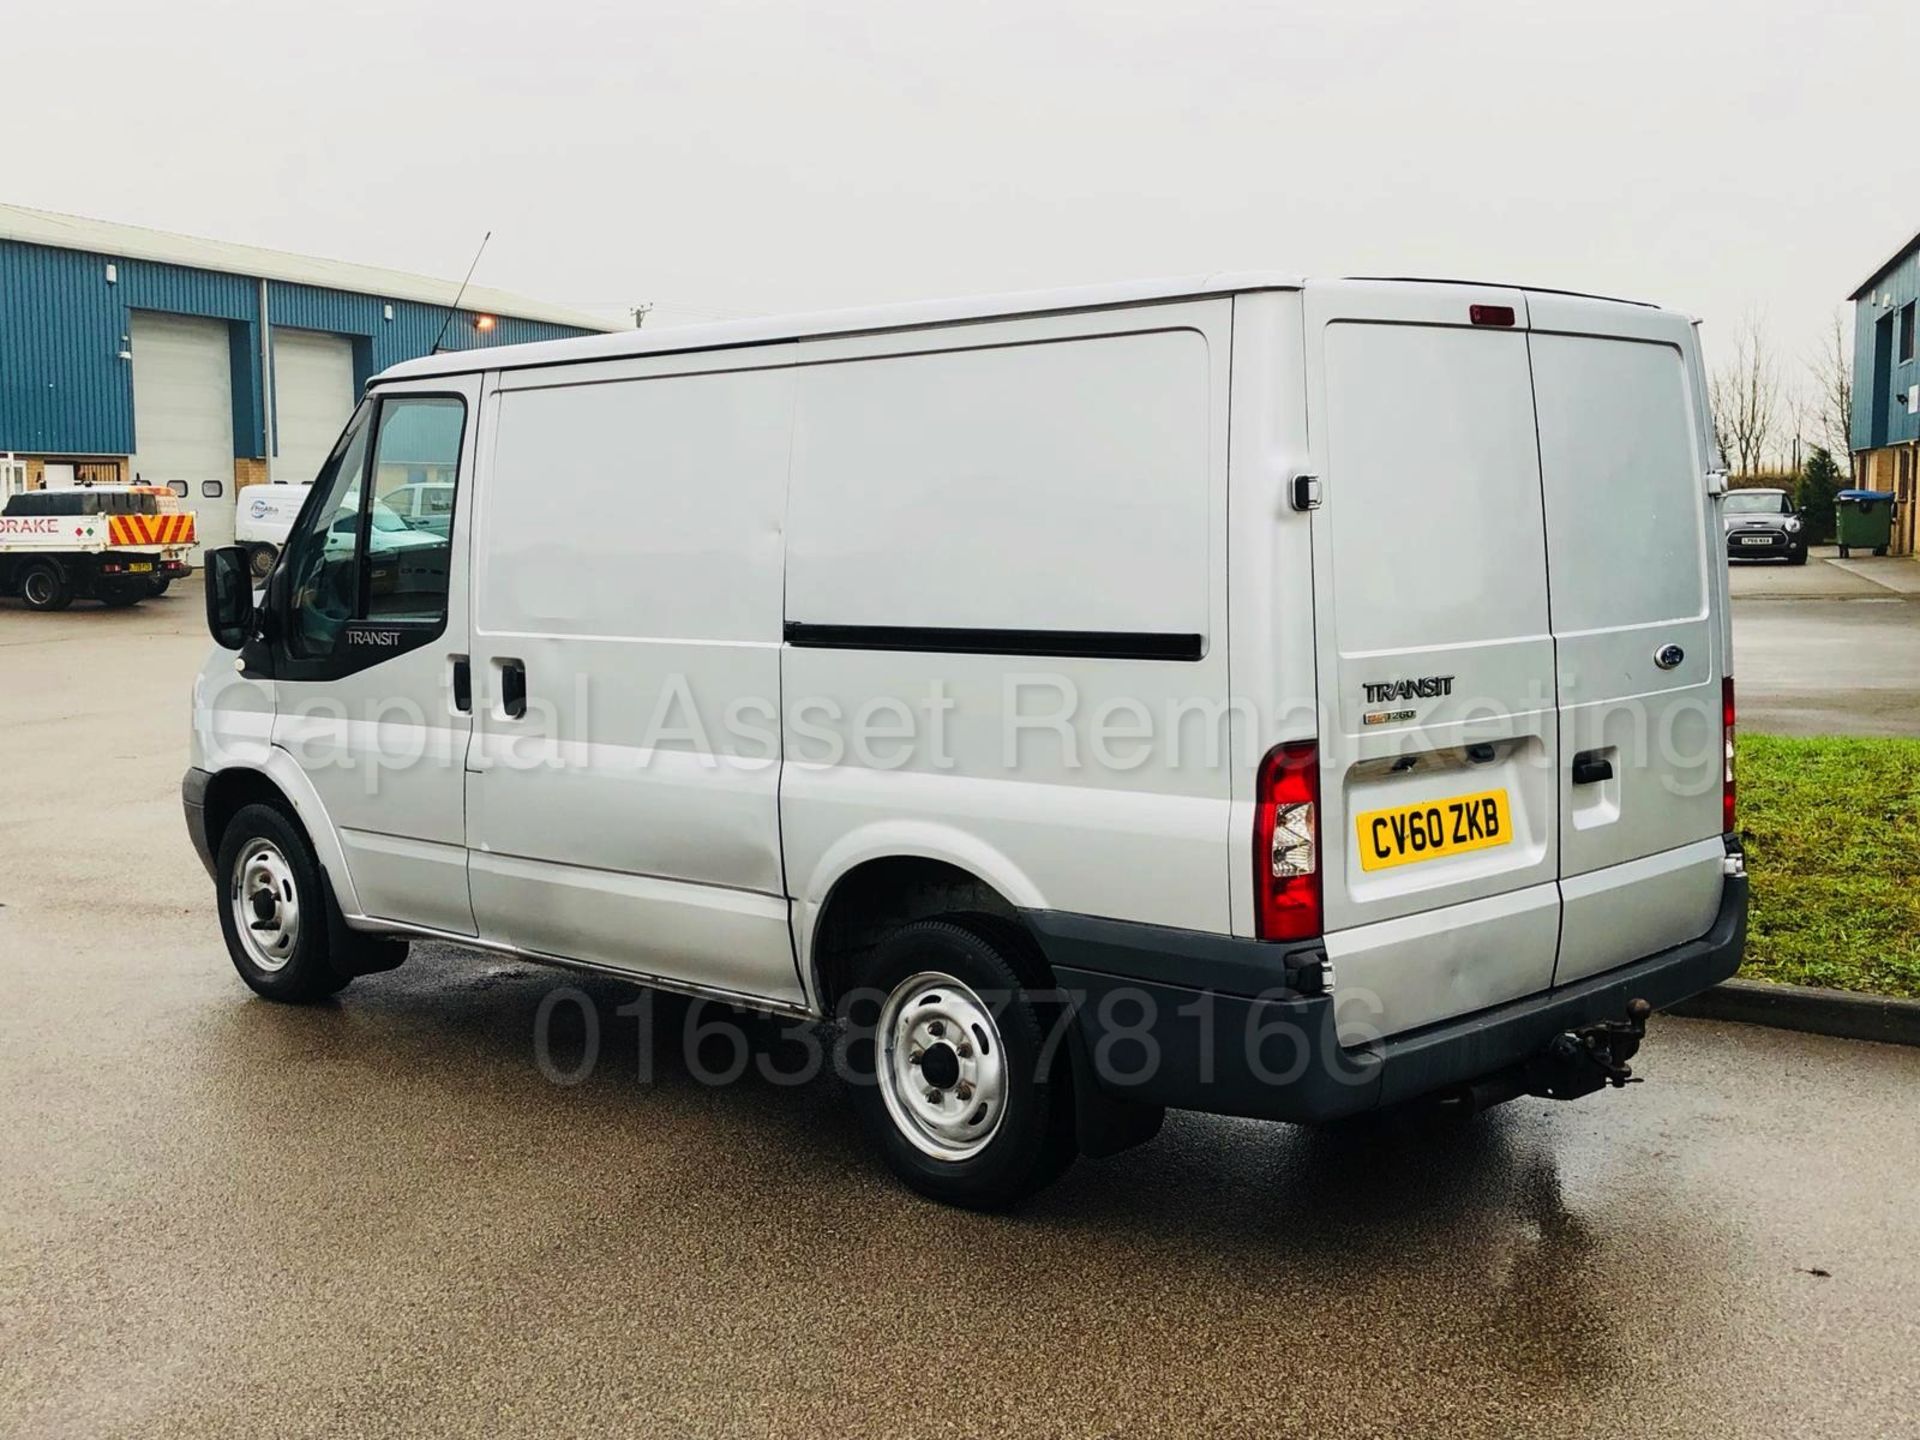 FORD TRANSIT 85 T260S FWD 'SWB' (2011 MODEL) '2.2 TDCI - 85 BHP - 5 SPEED' **ULTRA LOW MILES** - Image 5 of 22